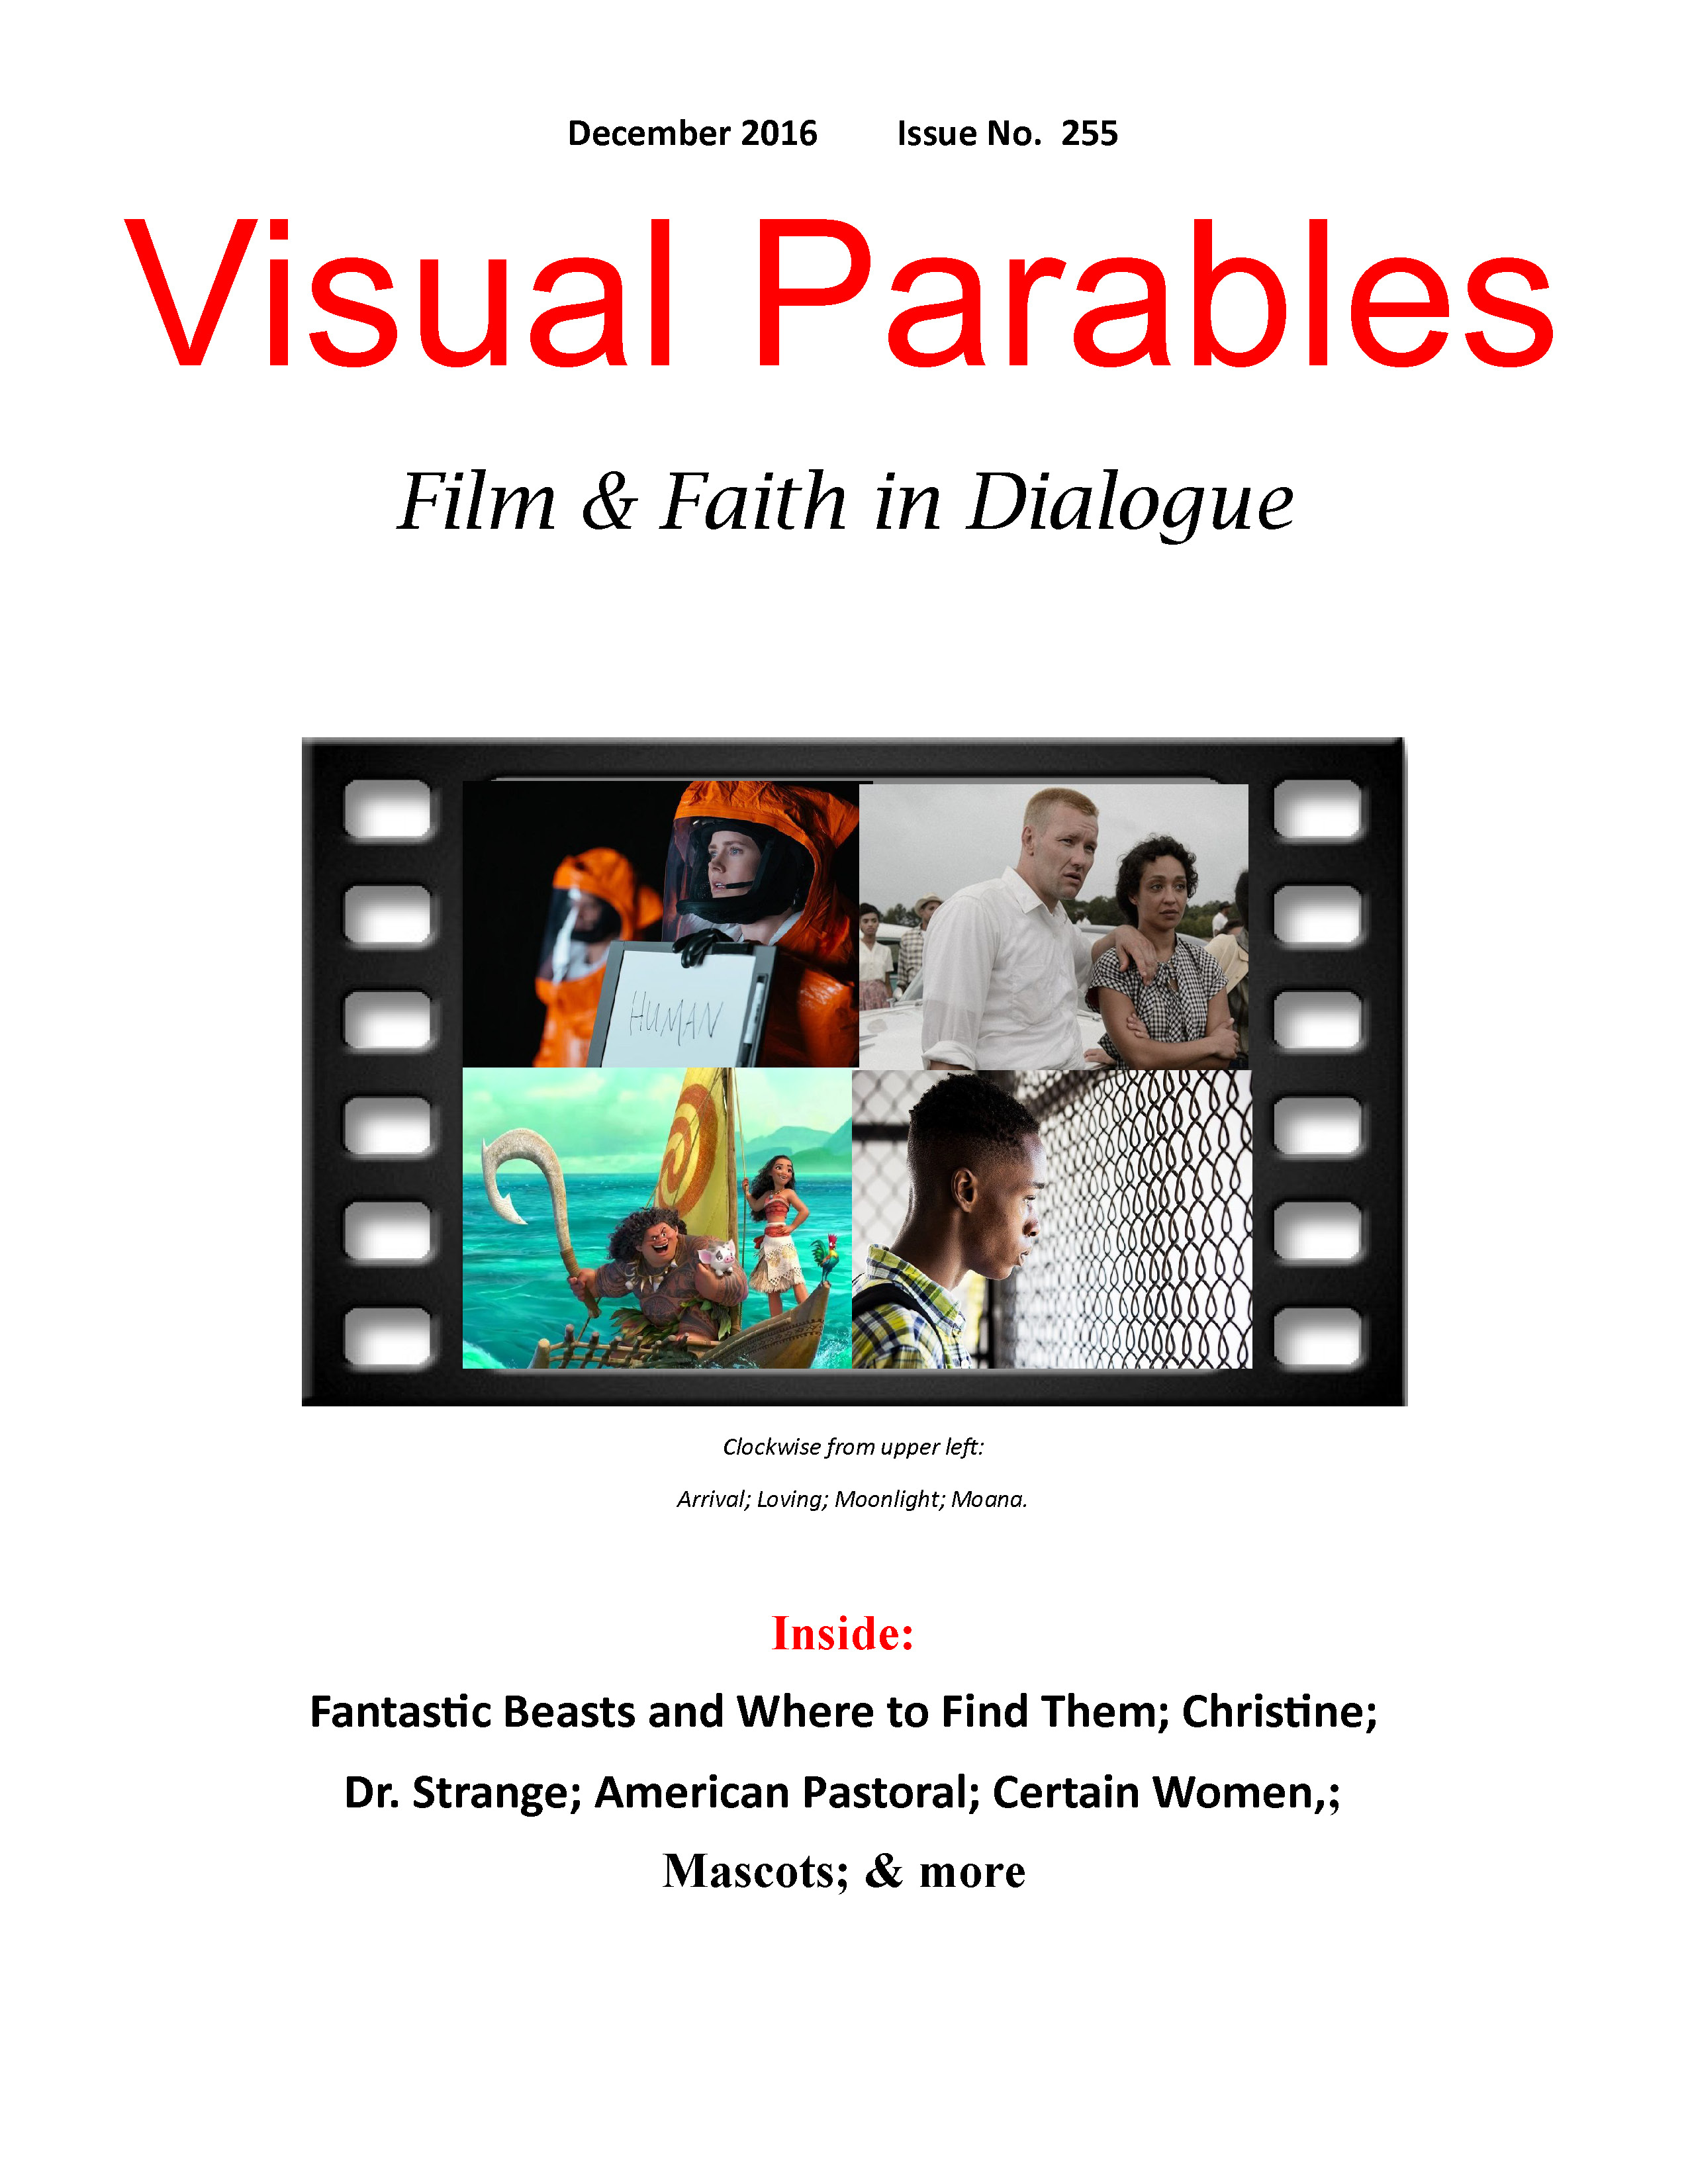 December 2016 issue of Visual Parables